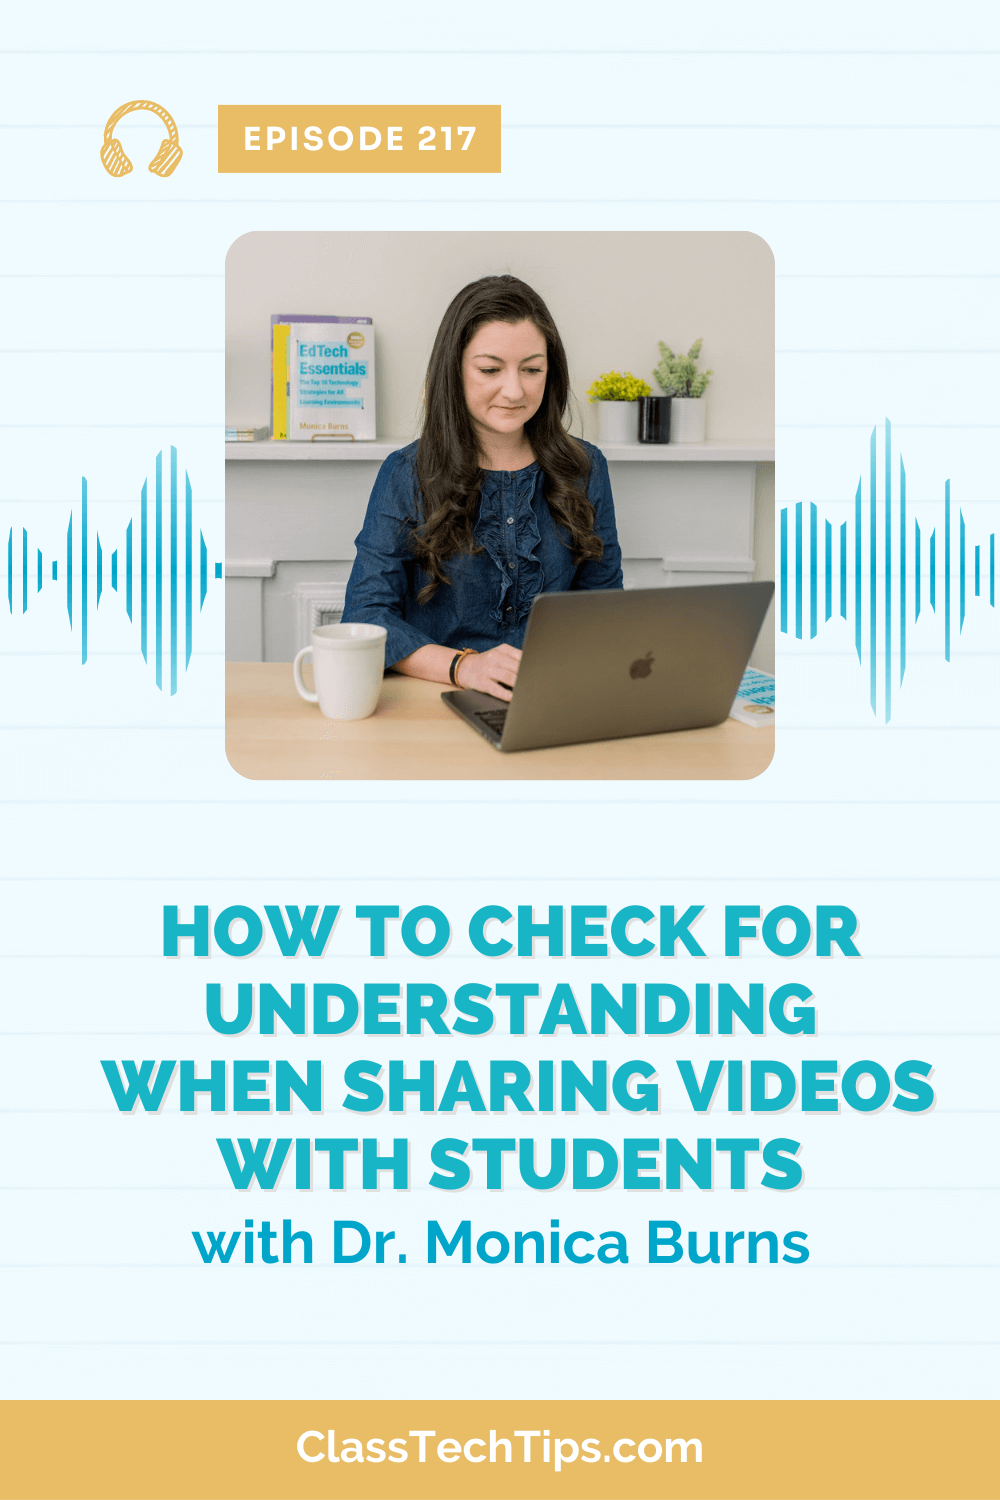 Podcast host Monica Burns preparing to discuss strategies for assessing student understanding during video lessons, with a graphic representation of soundwaves in the background.